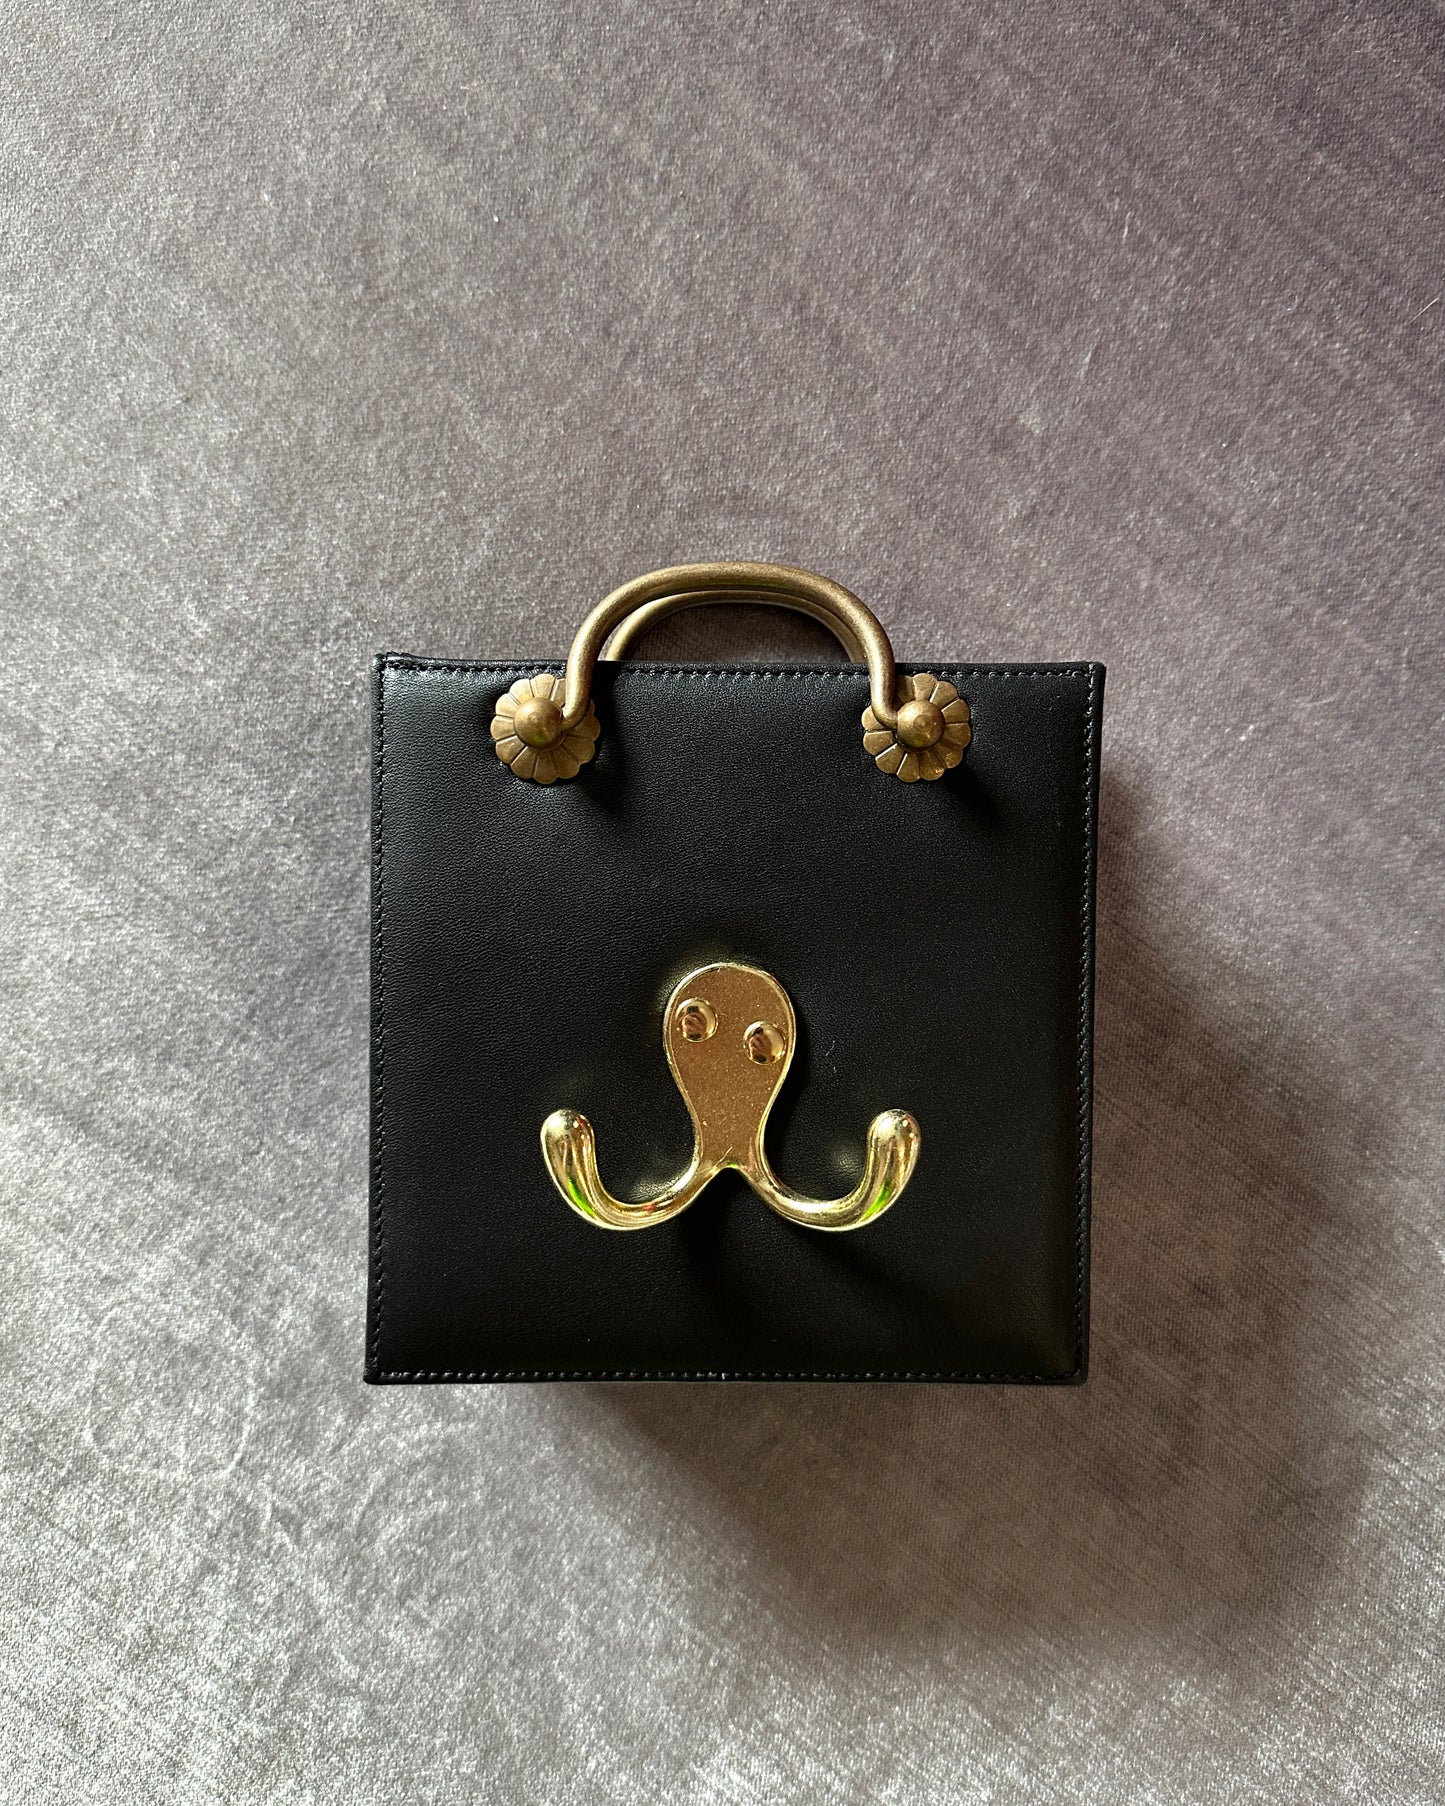 Mini black leather bag with gold handle and hanger hardware.